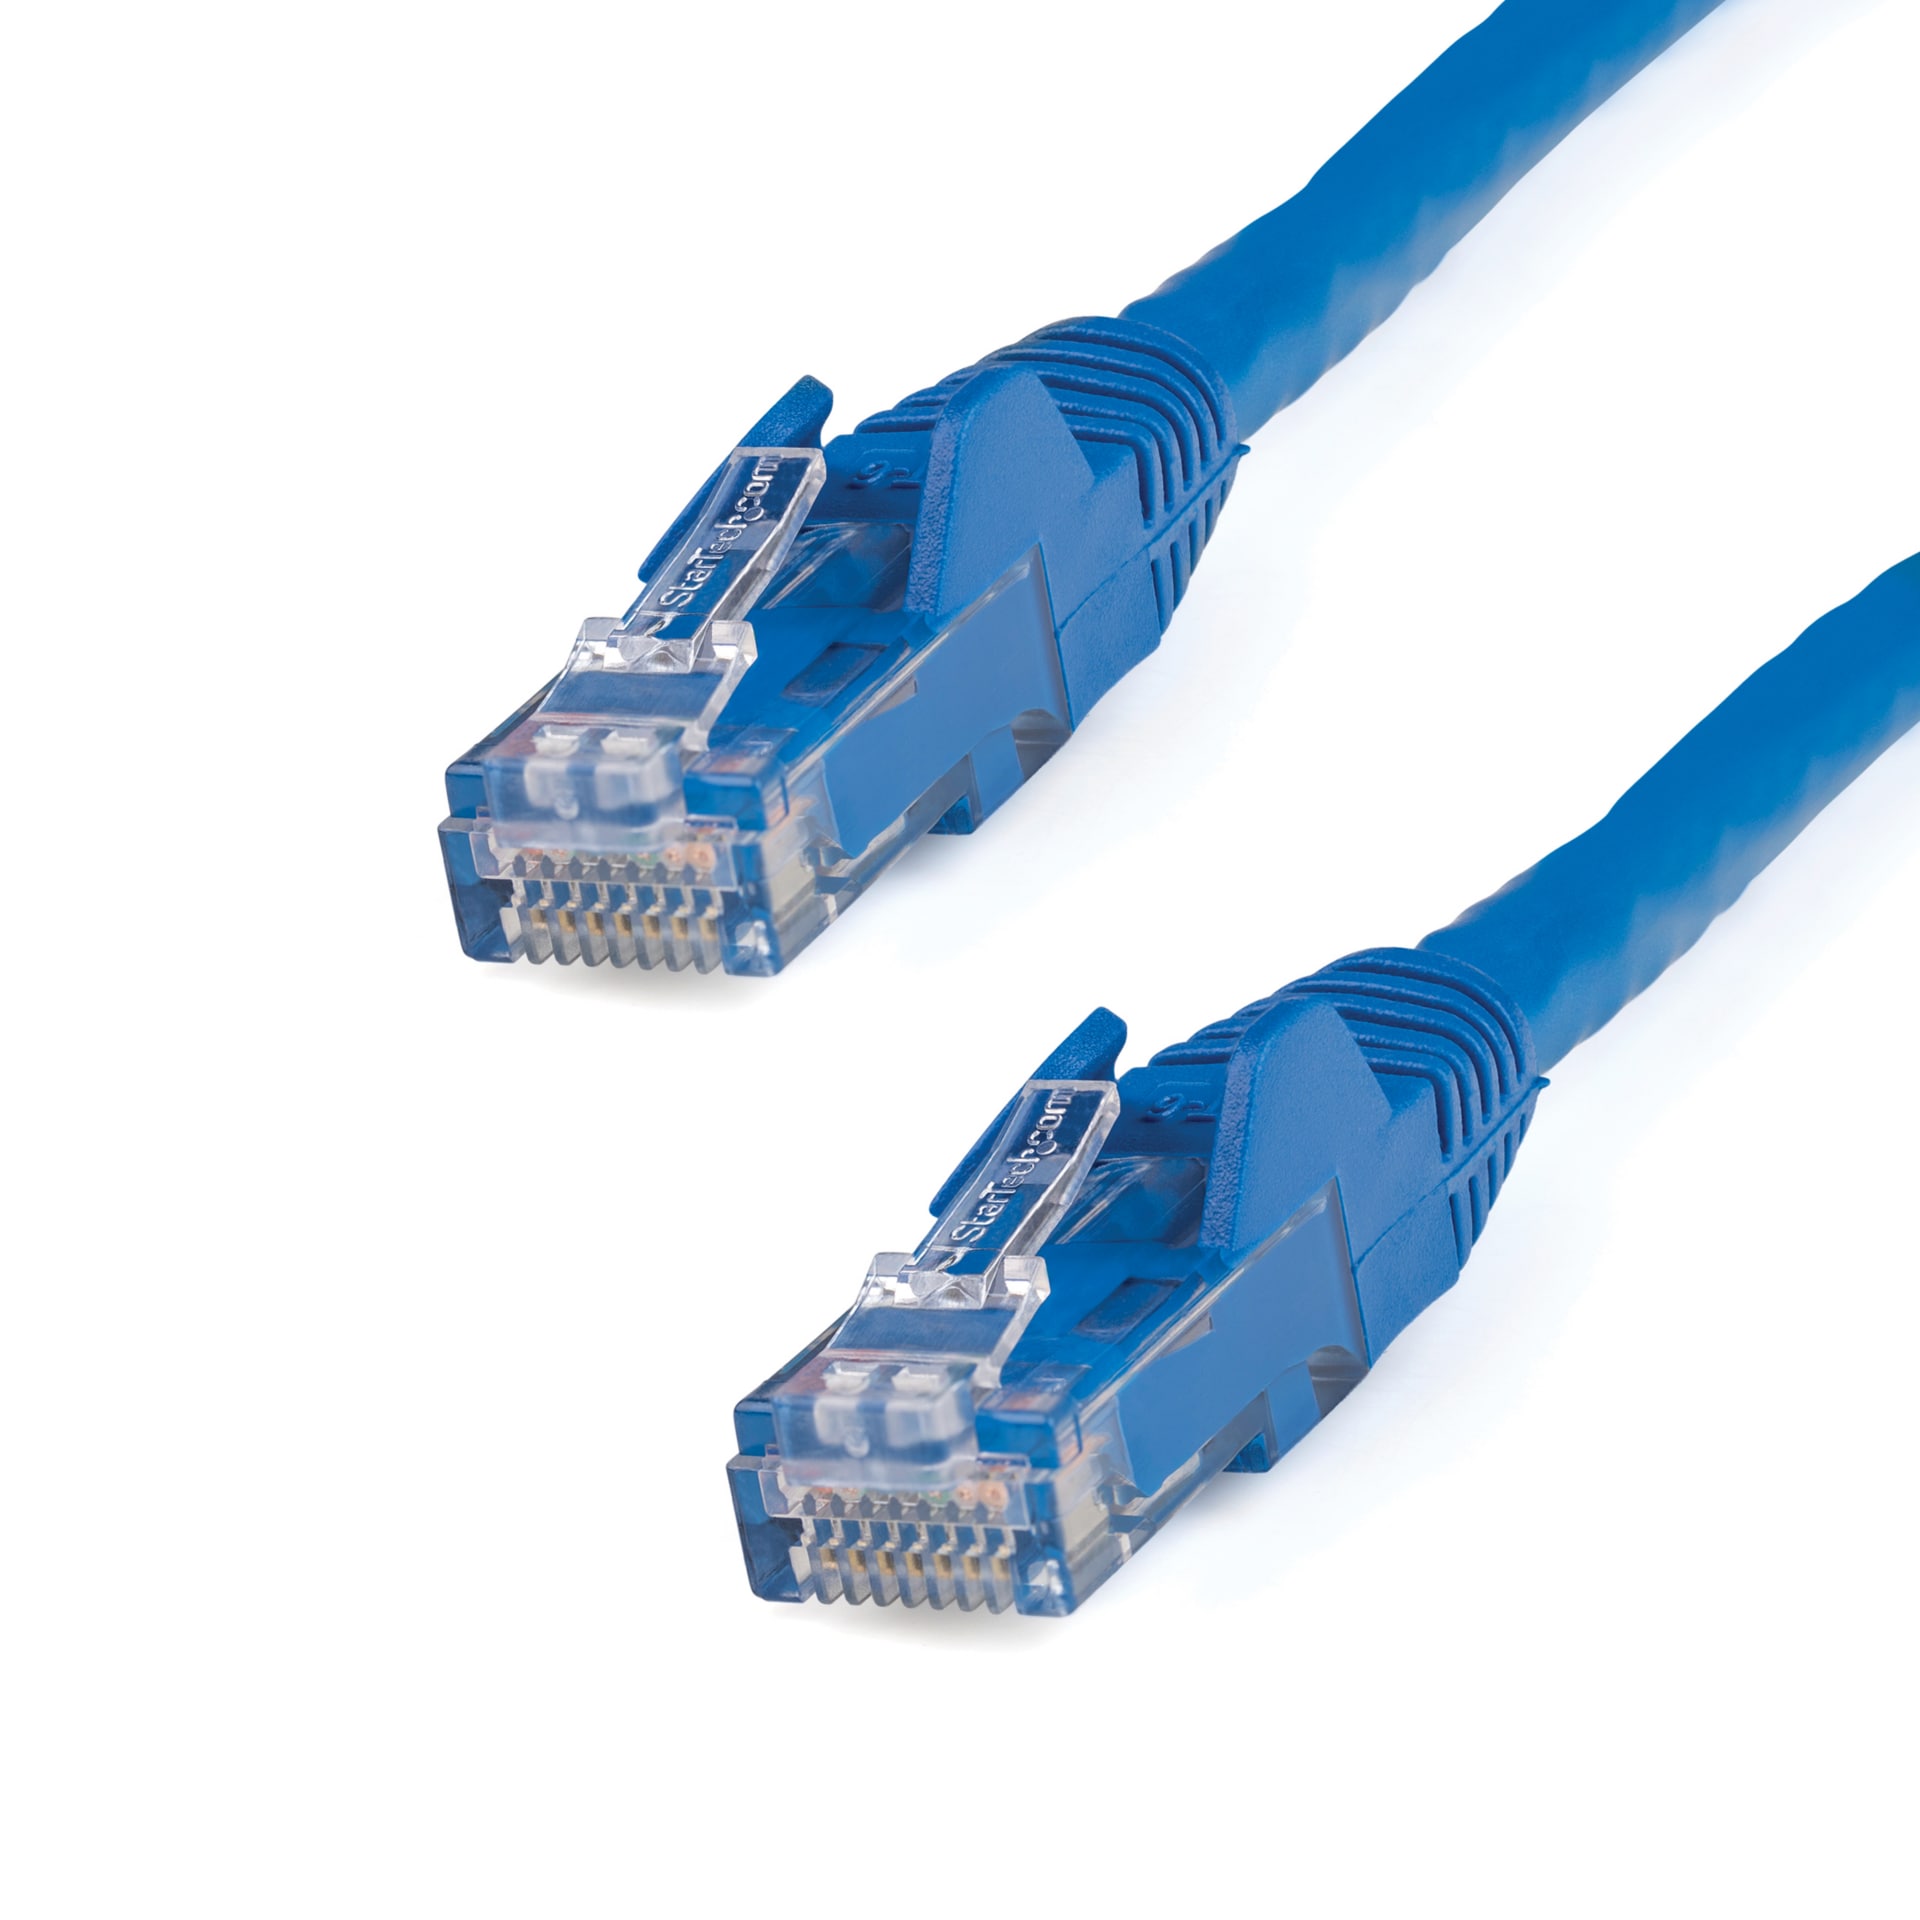 StarTech.com 6in CAT6 Ethernet Cable Blue Snagless UTP CAT 6 Gigabit Cord/Wire 100W PoE 650MHz